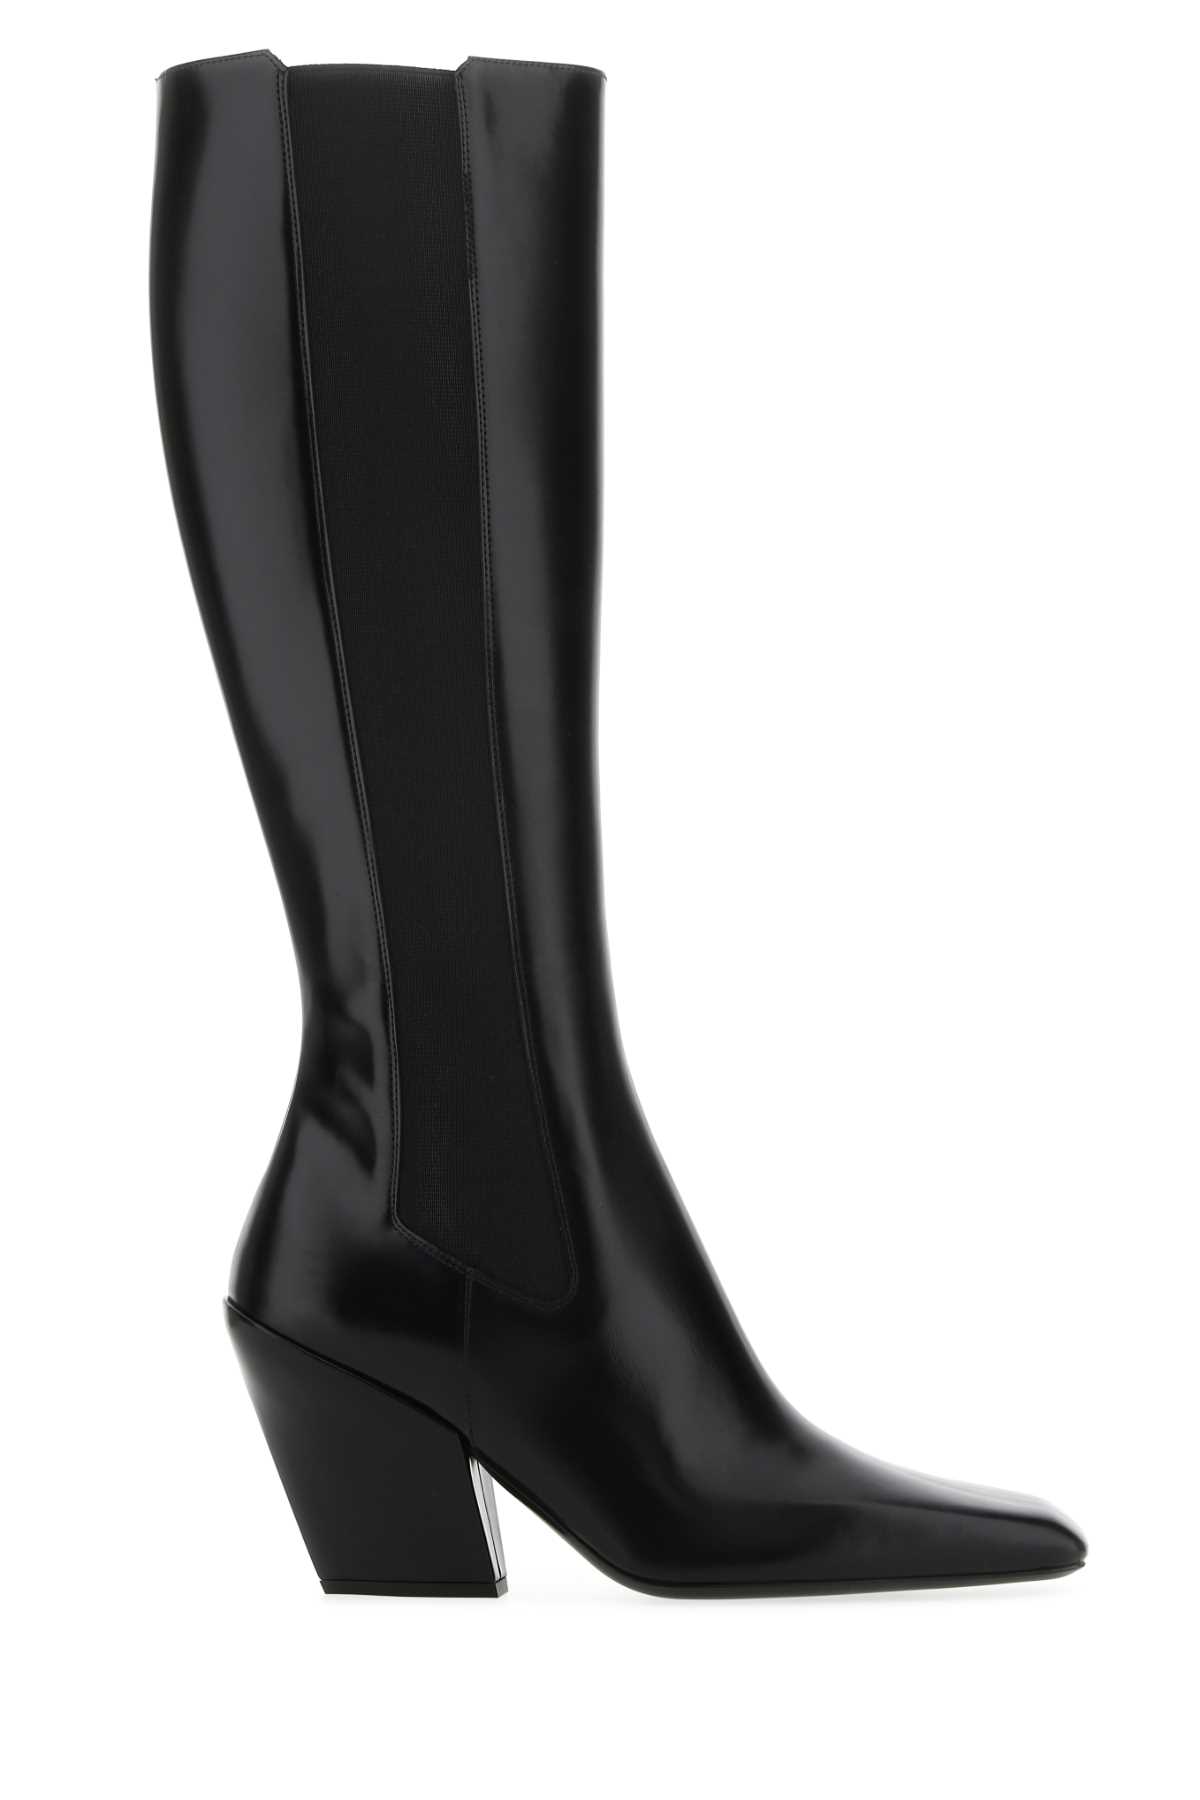 Shop Prada Black Leather Boots In F0002